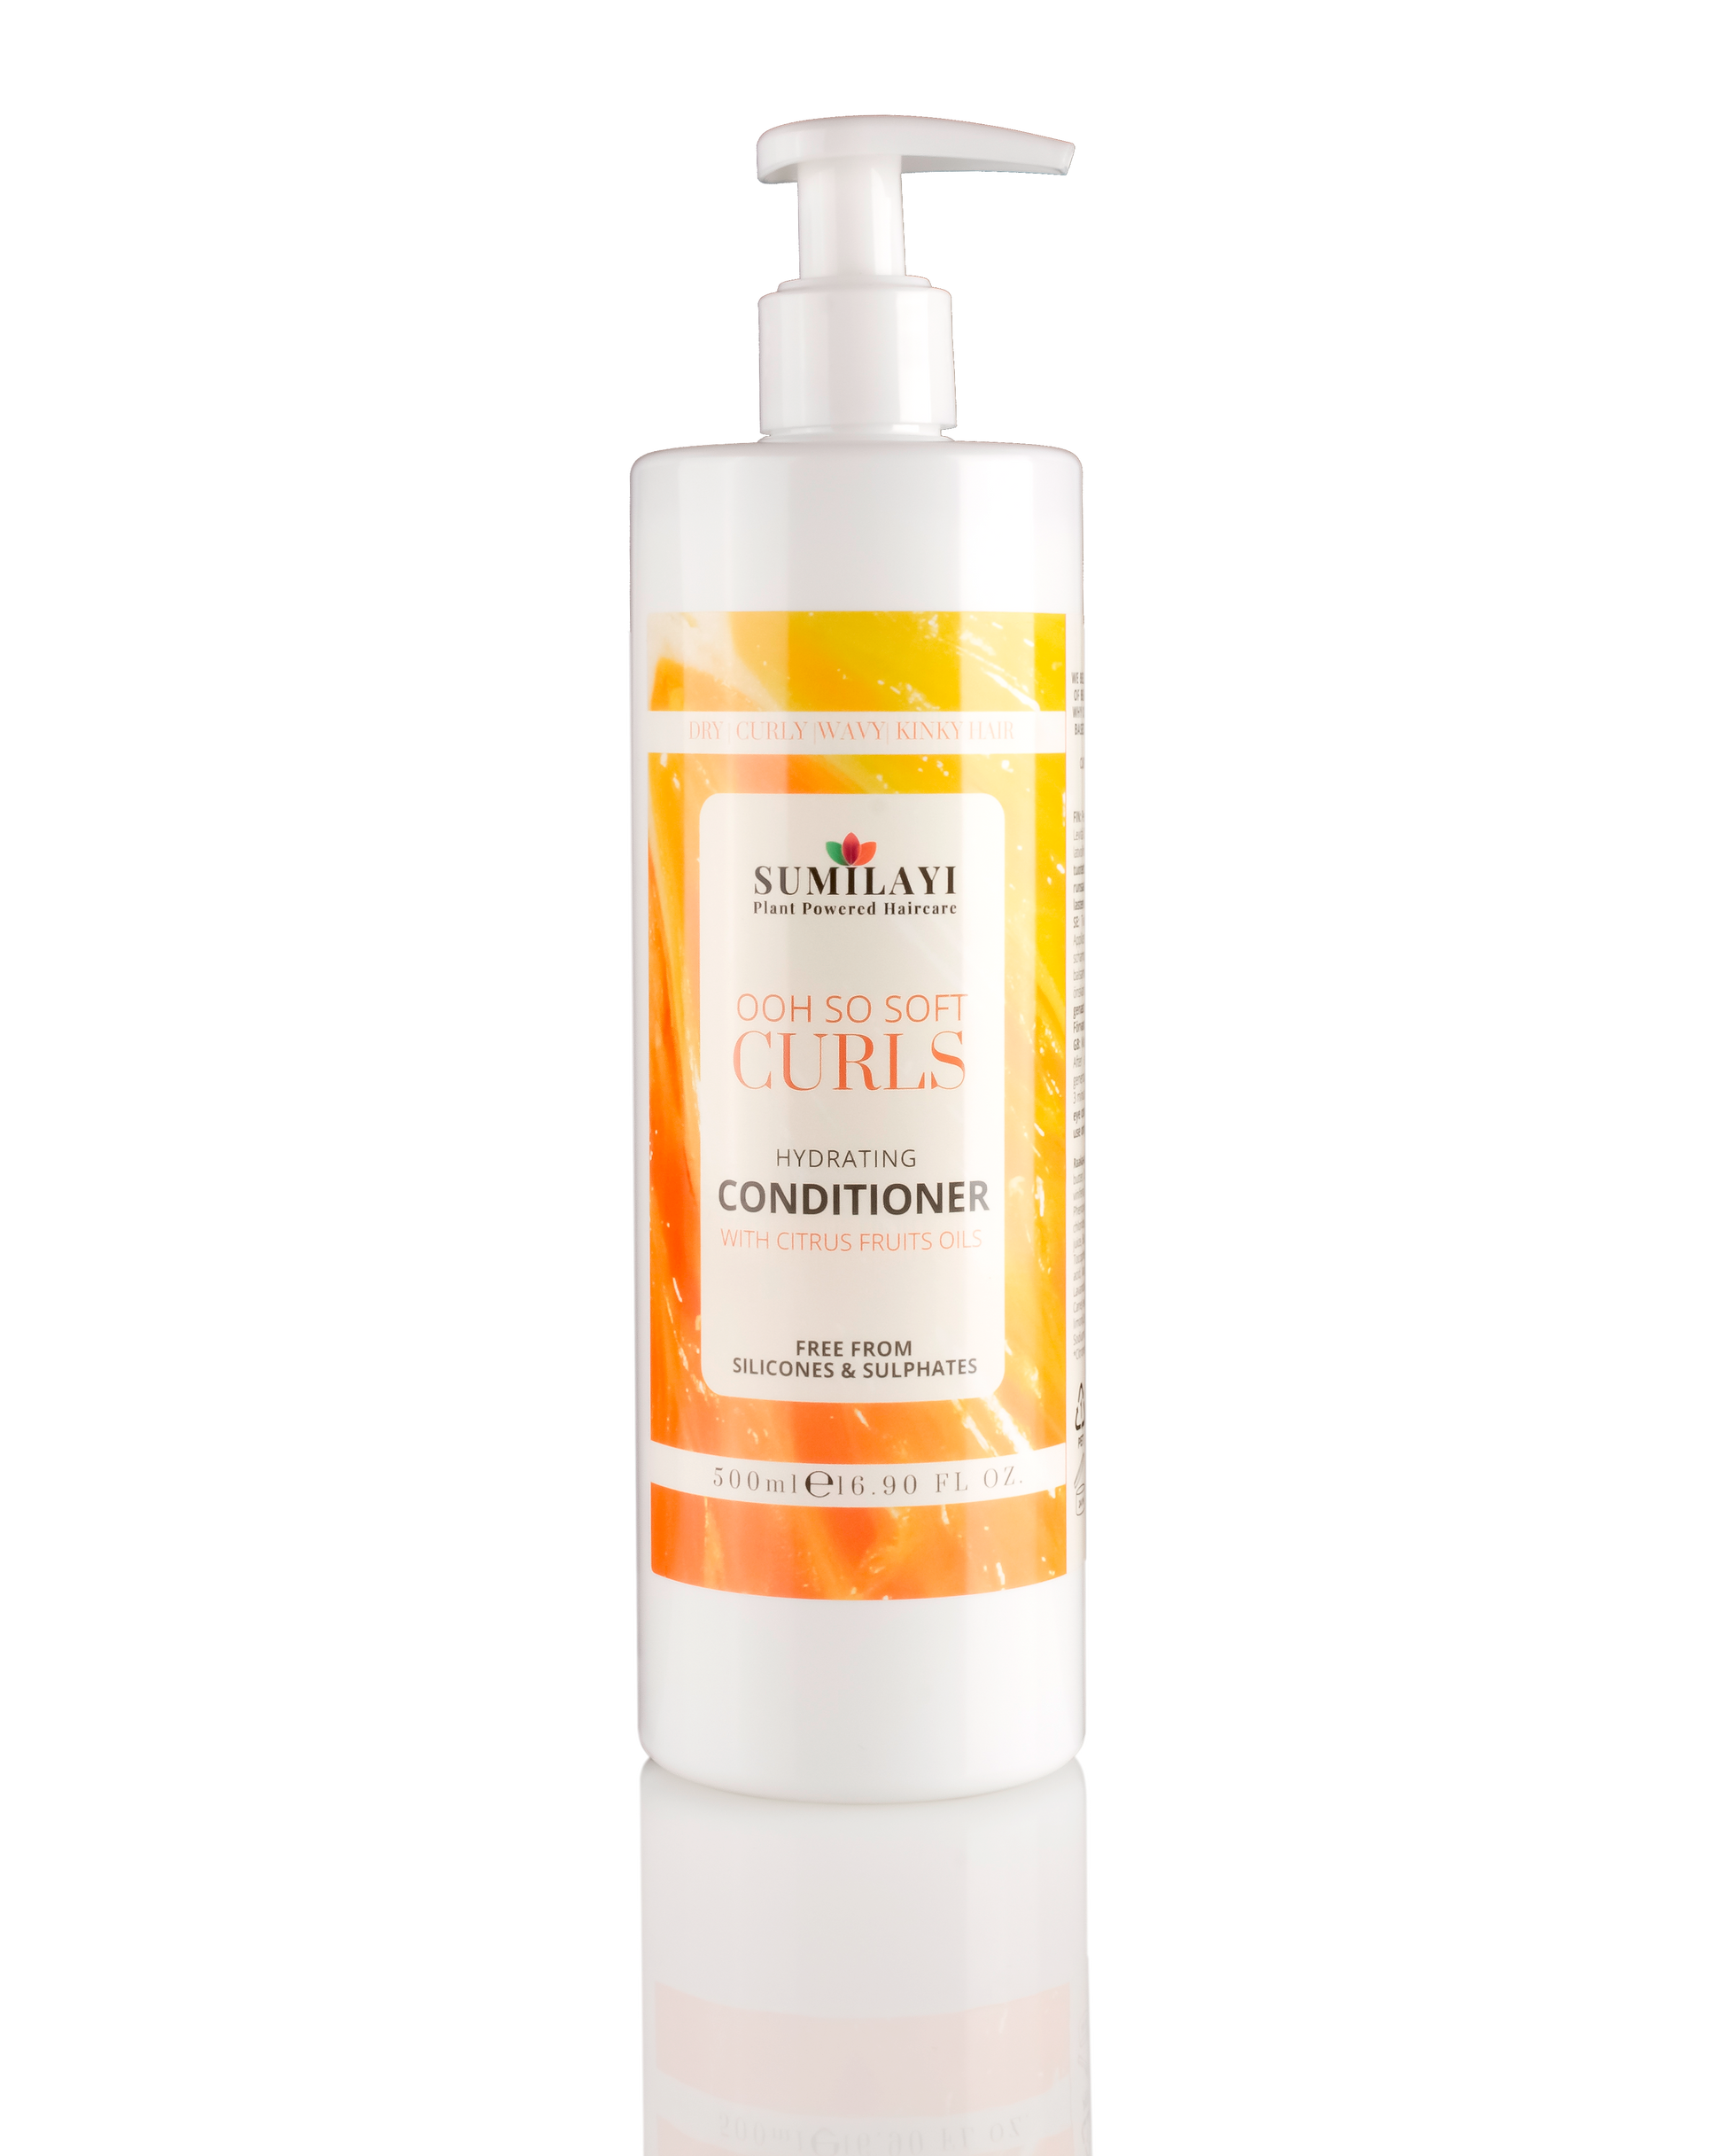 Ooh So Soft Curls - Hydrating Conditioner 500ml - Sumilayi Plant-Powered Haircare